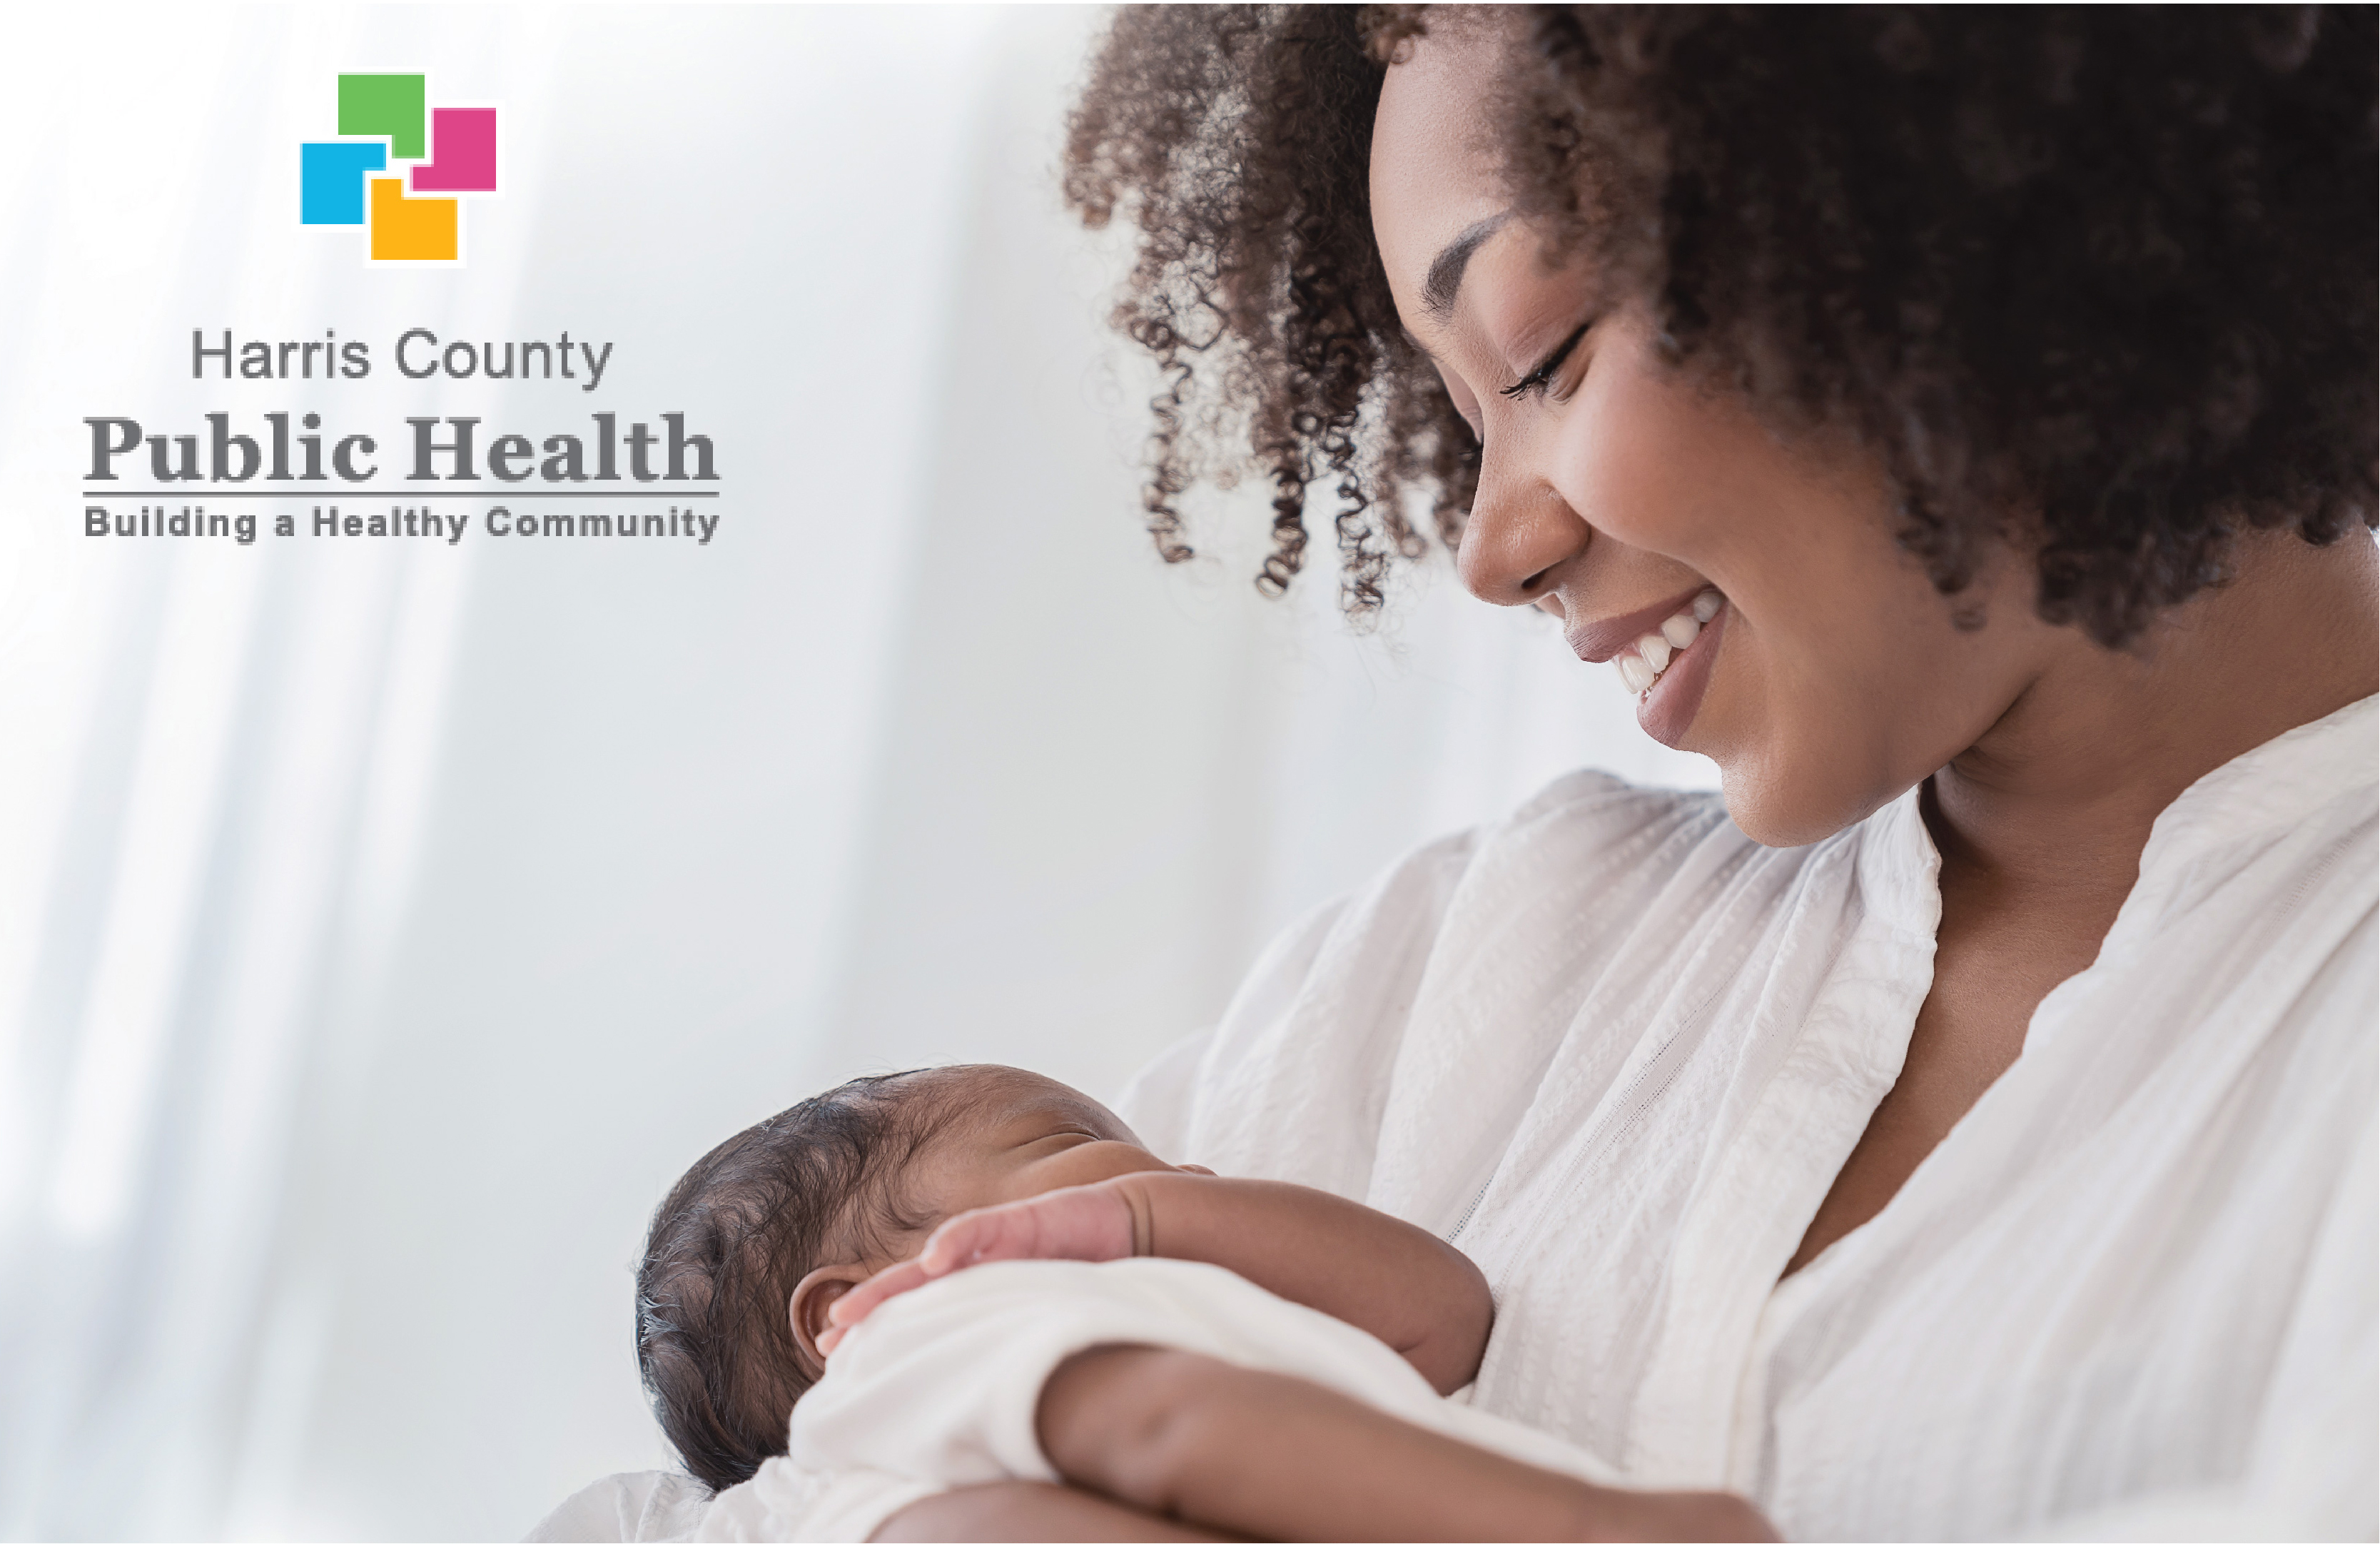 Harris County Accelerates Maternal Health Advocacy with the Launch of the Maternal Health Bill of Rights